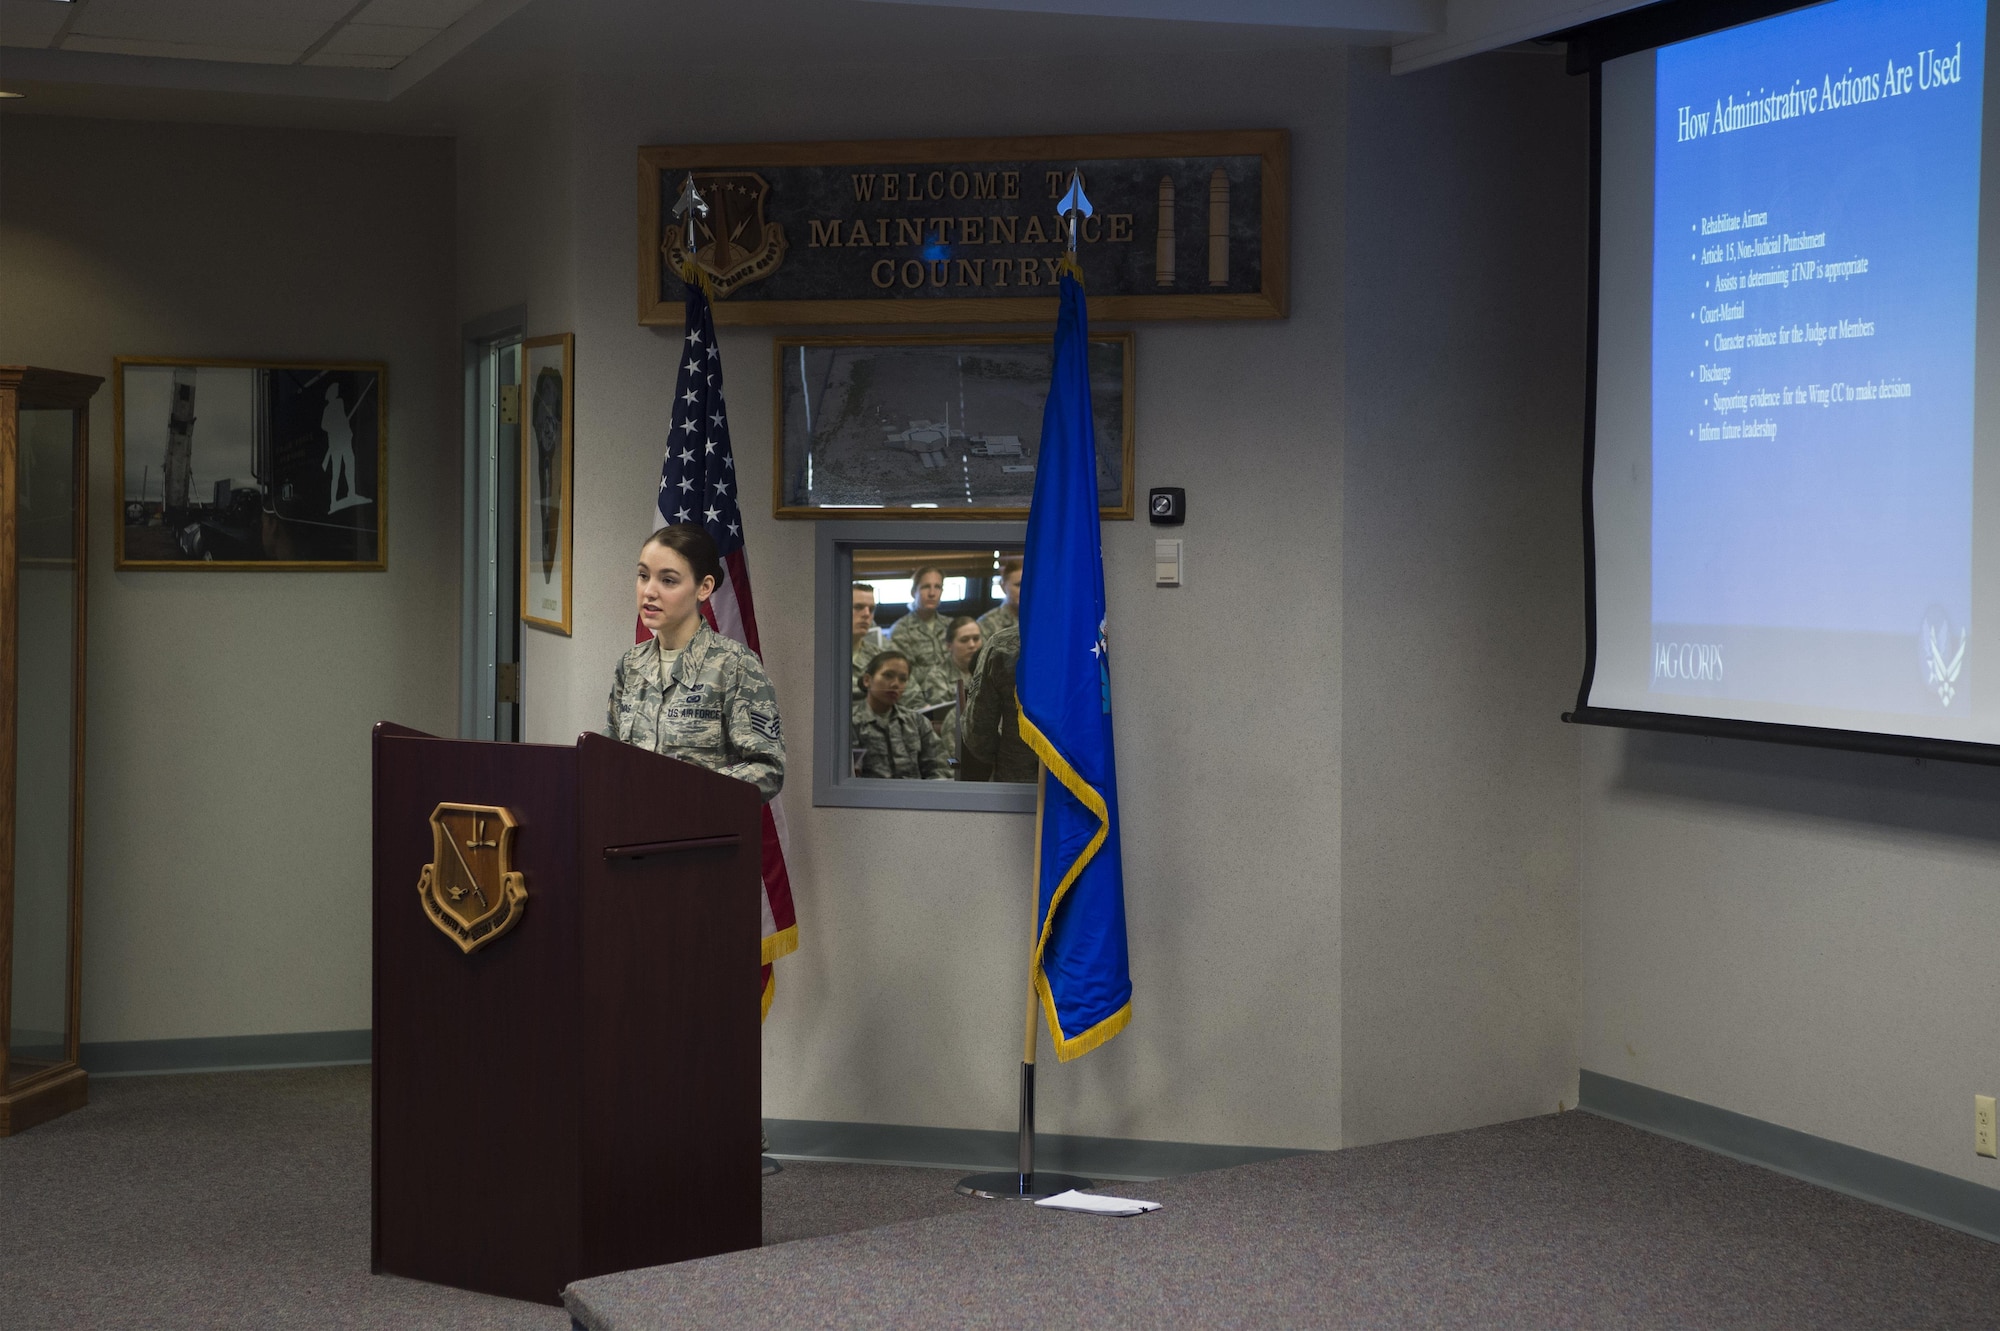 Staff Sgt. Jessica Thomas, 90th Missile Wing legal NCO in charge of military justice, leads a Military Justice 101: Administrative Paperwork class at F.E. Warren Air Force Base, Wyo., April 5, 2017. More than 50 military members attended the class to discover the ins and outs of progressive discipline and writing effective administrative actions. (U.S. Air Force photo by Staff Sgt. Christopher Ruano)